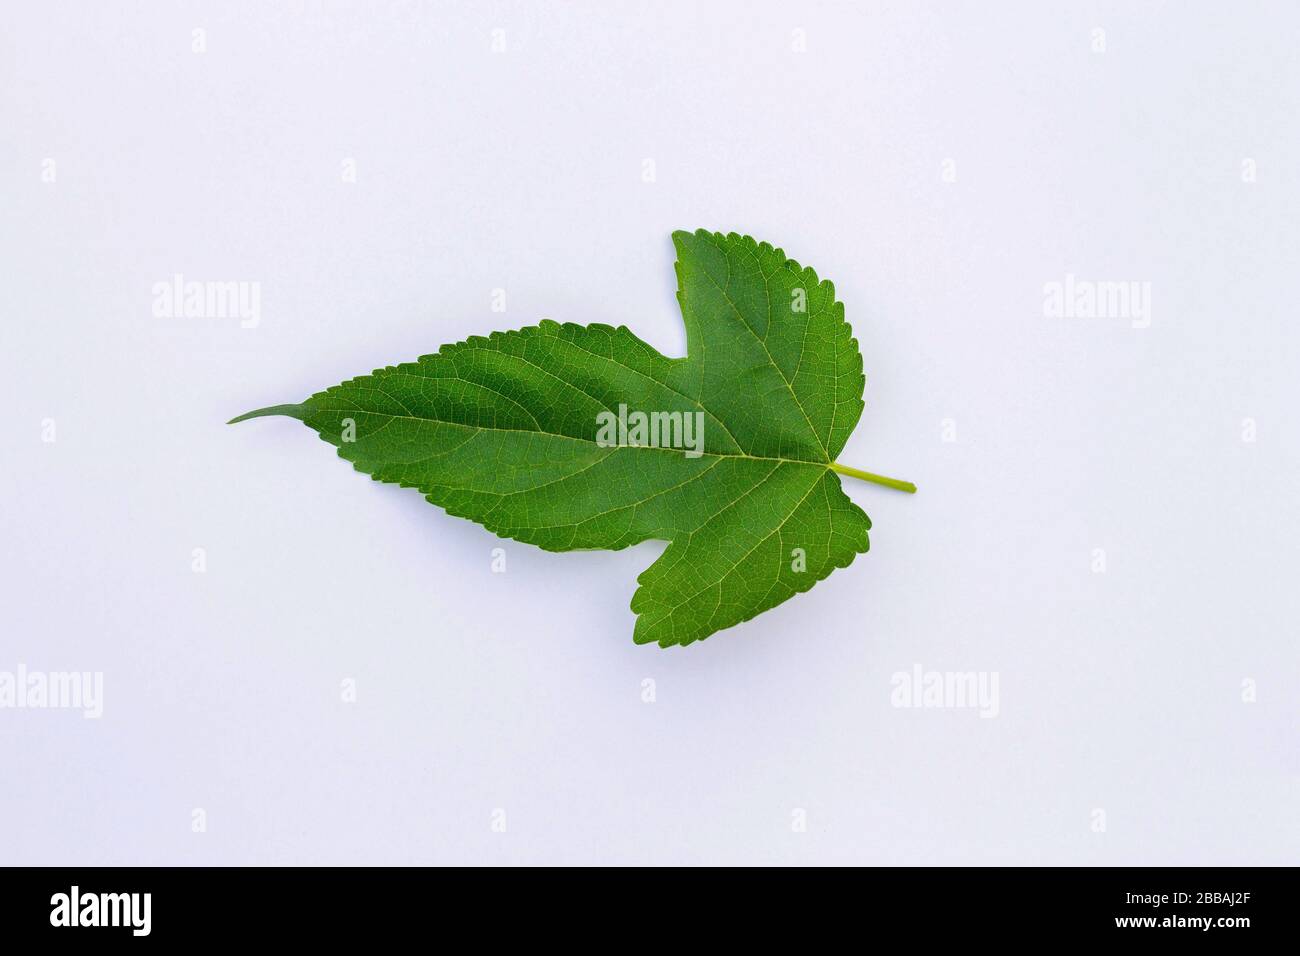 Mulberry leaf isolate on white background Stock Photo